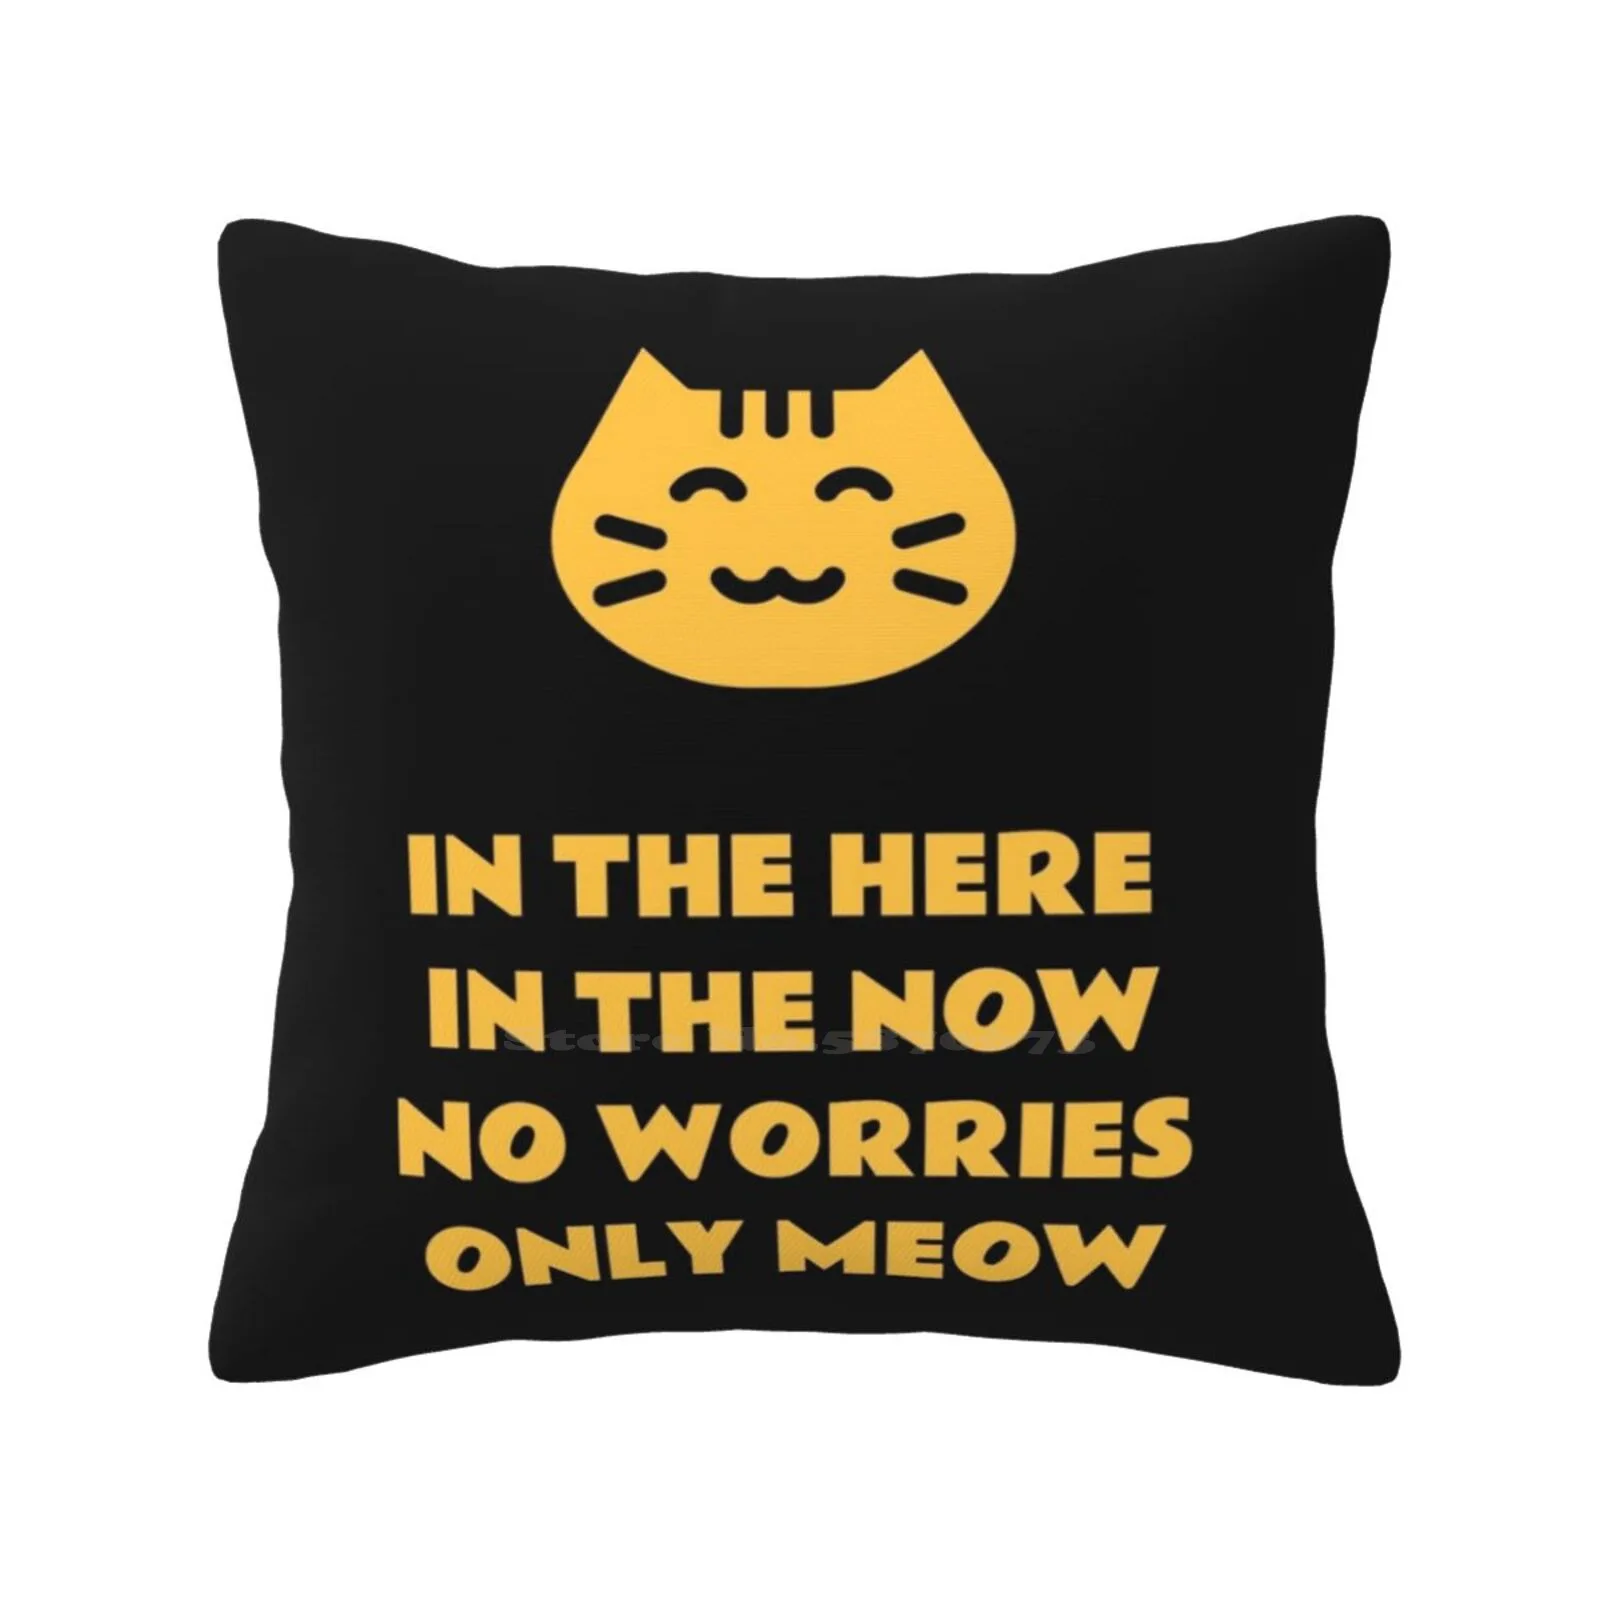 

In The Here In The Now No Worries Only Meow Fashion Sofa Throw Pillow Cover Pillowcase In The Here In The Now No Worries Only